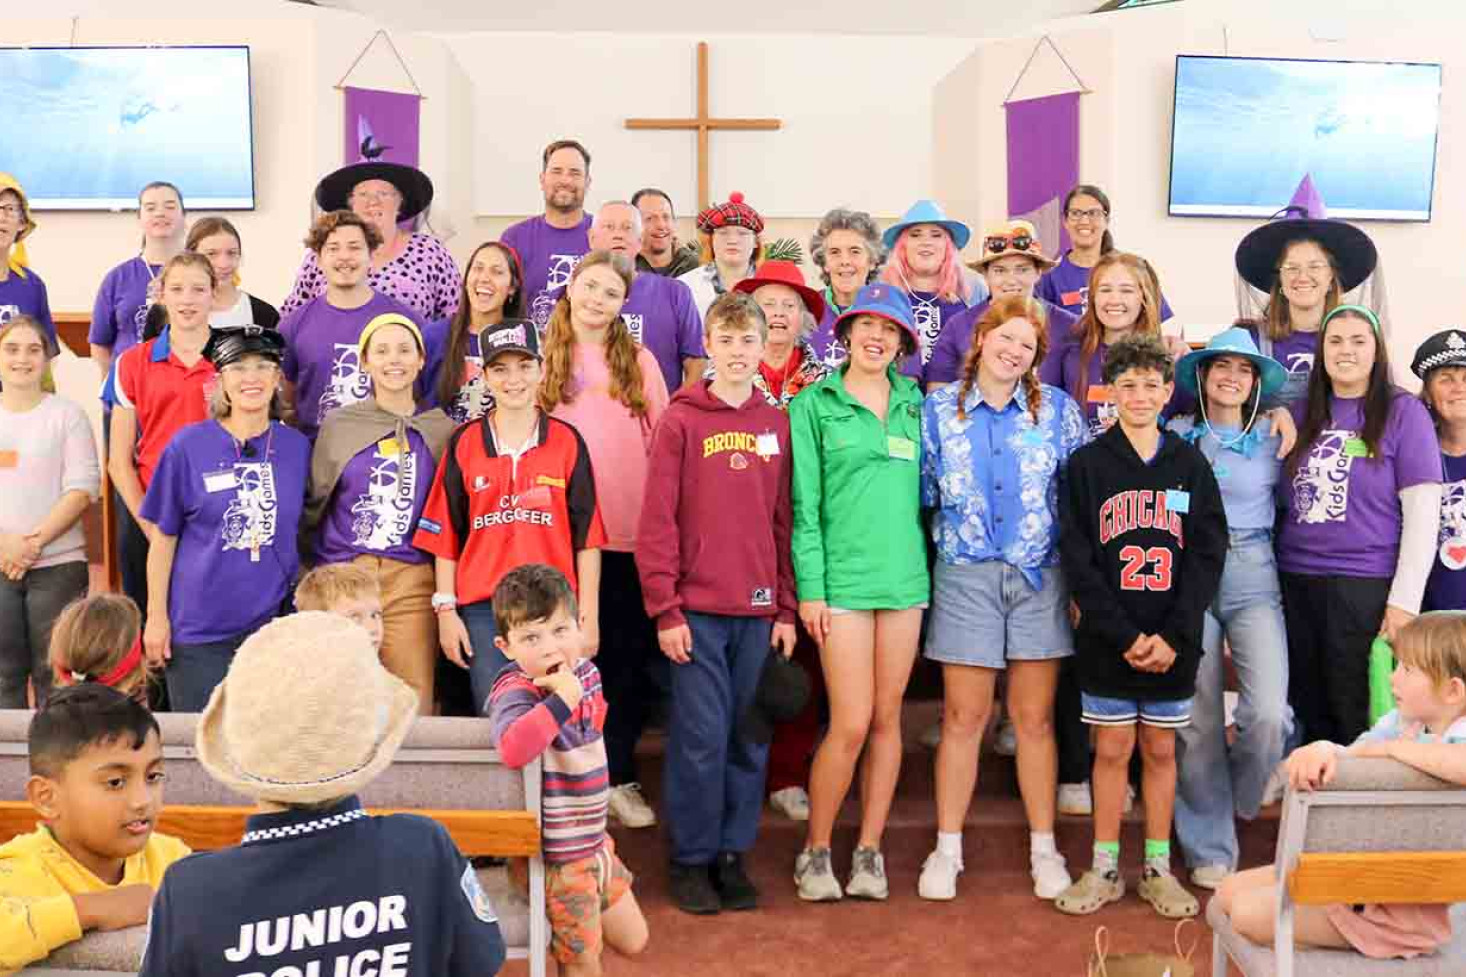 Thirty-five leaders and junior leaders, including 7 from YWAM made the KidsGames program possible.